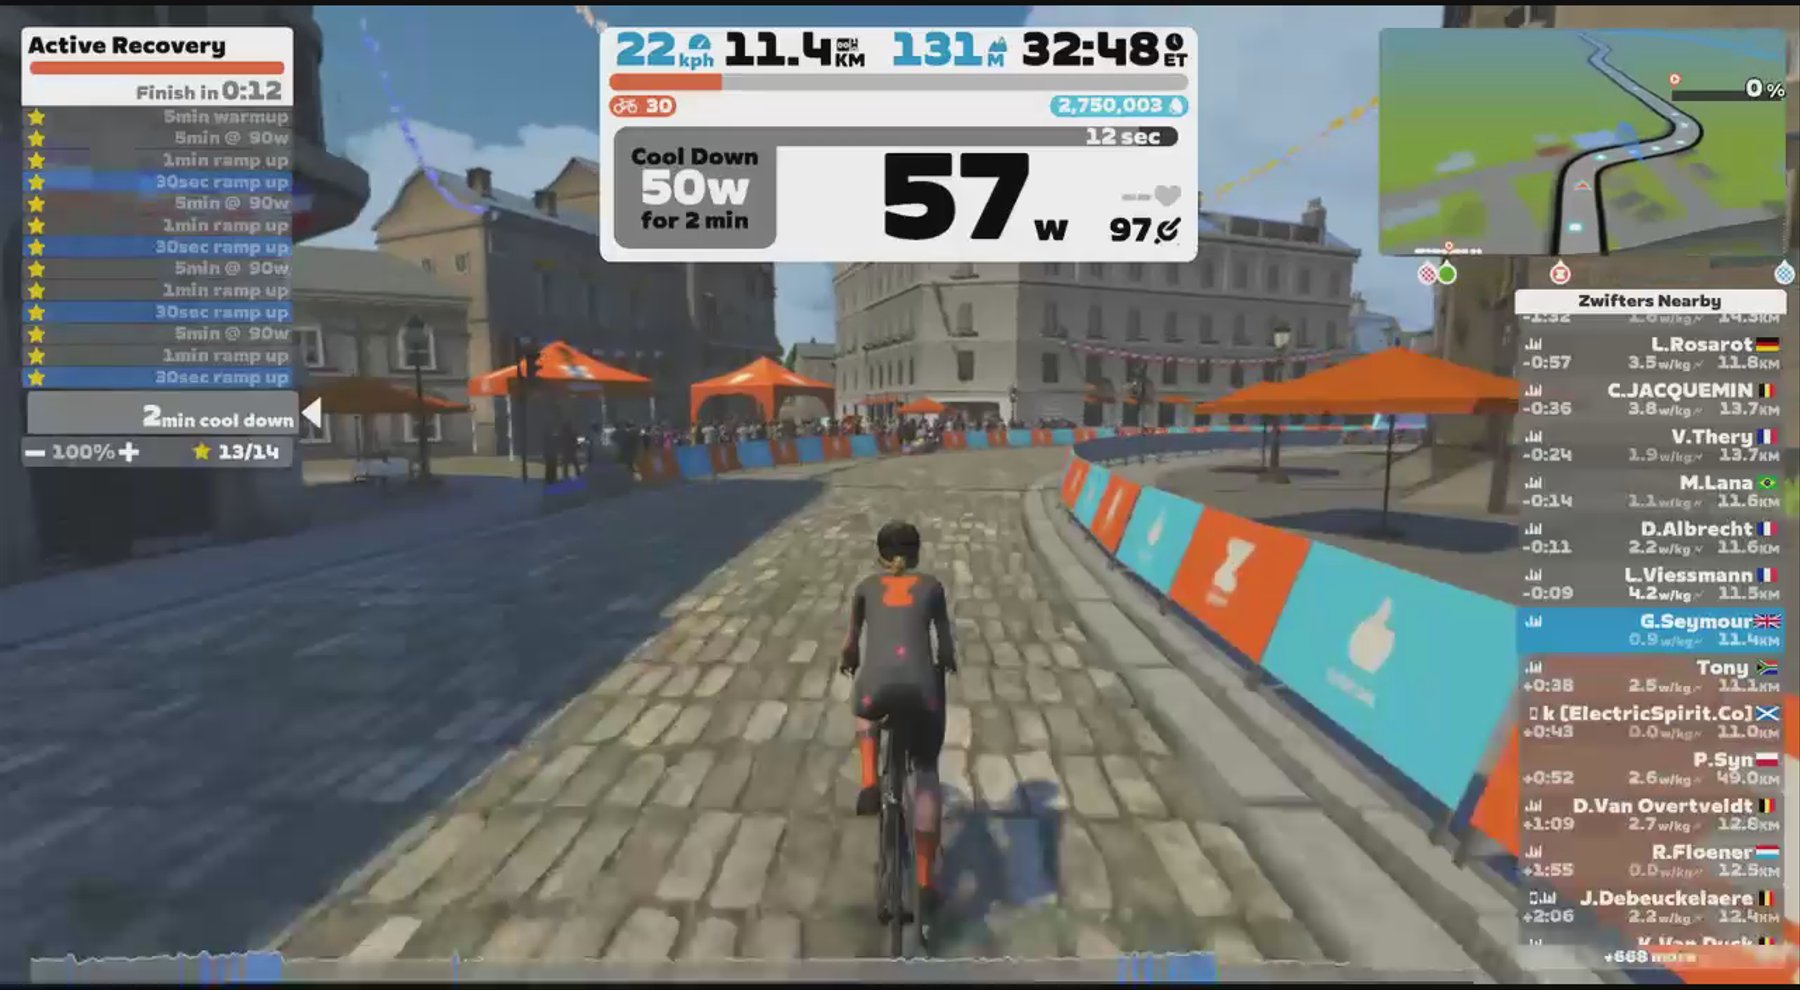 Zwift - Active Recovery in France